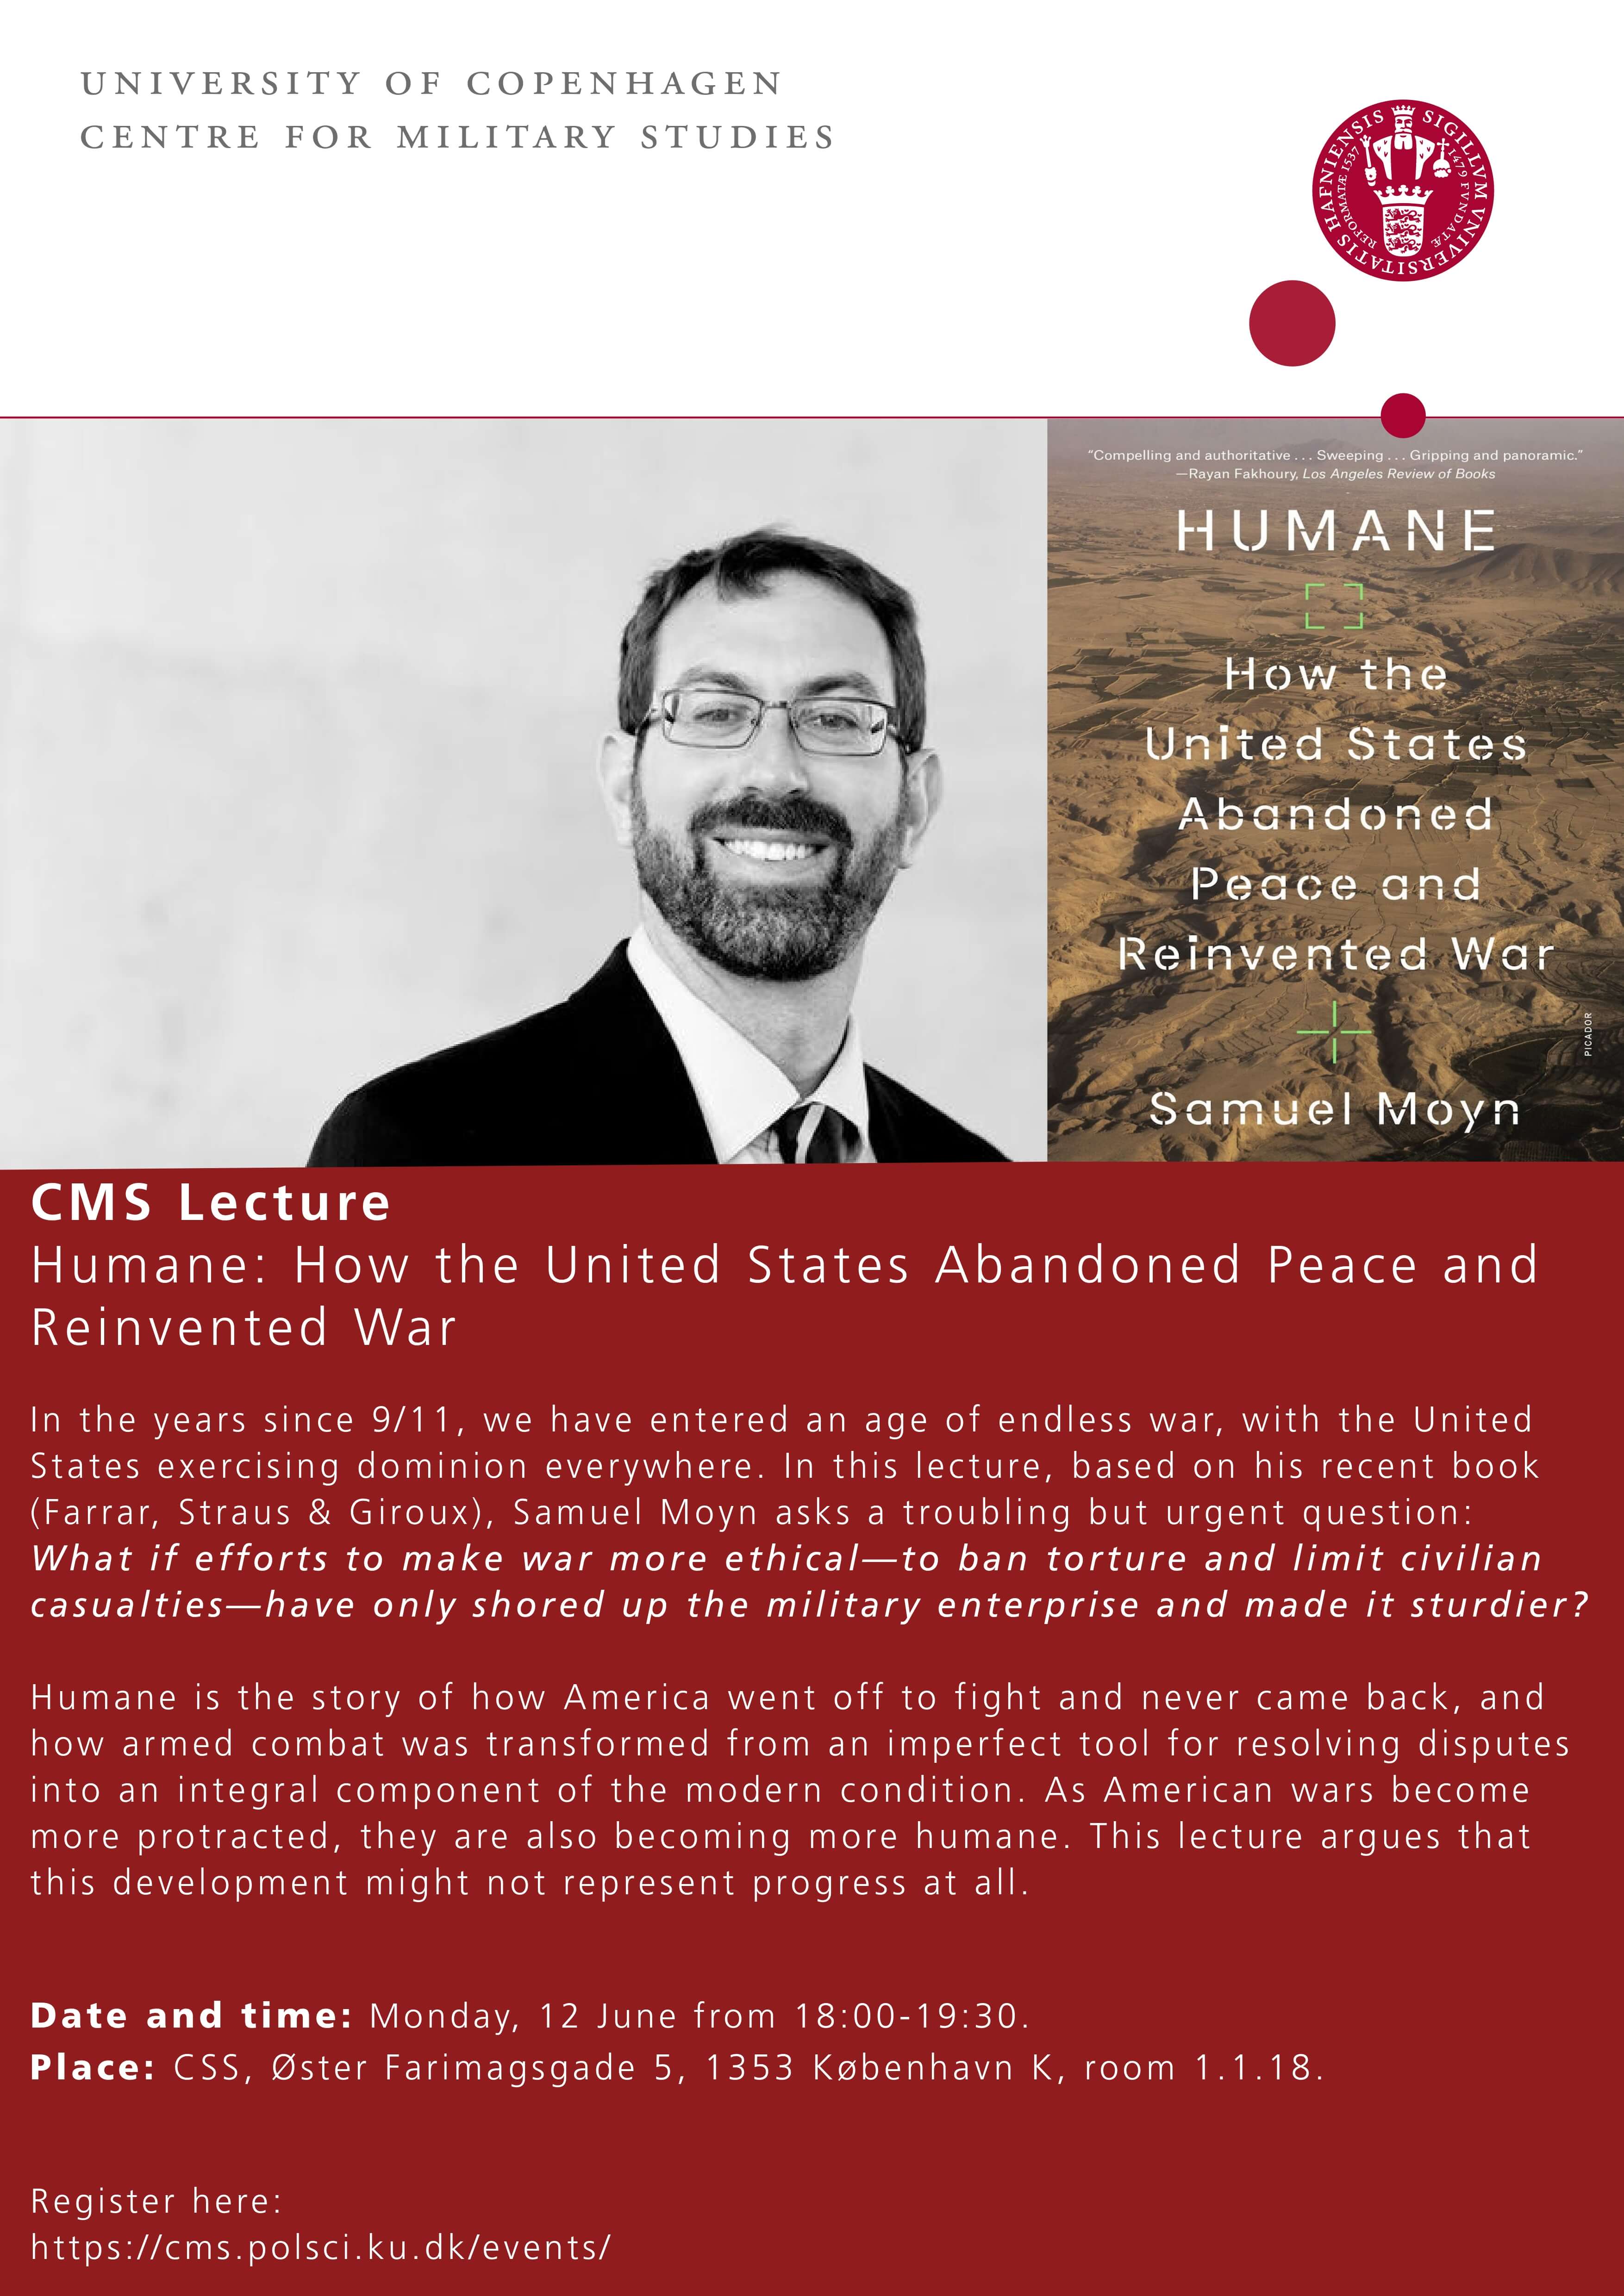 Invitation to the CMS lecture: Humane: How the United States Abandoned Peace and Reinvented War